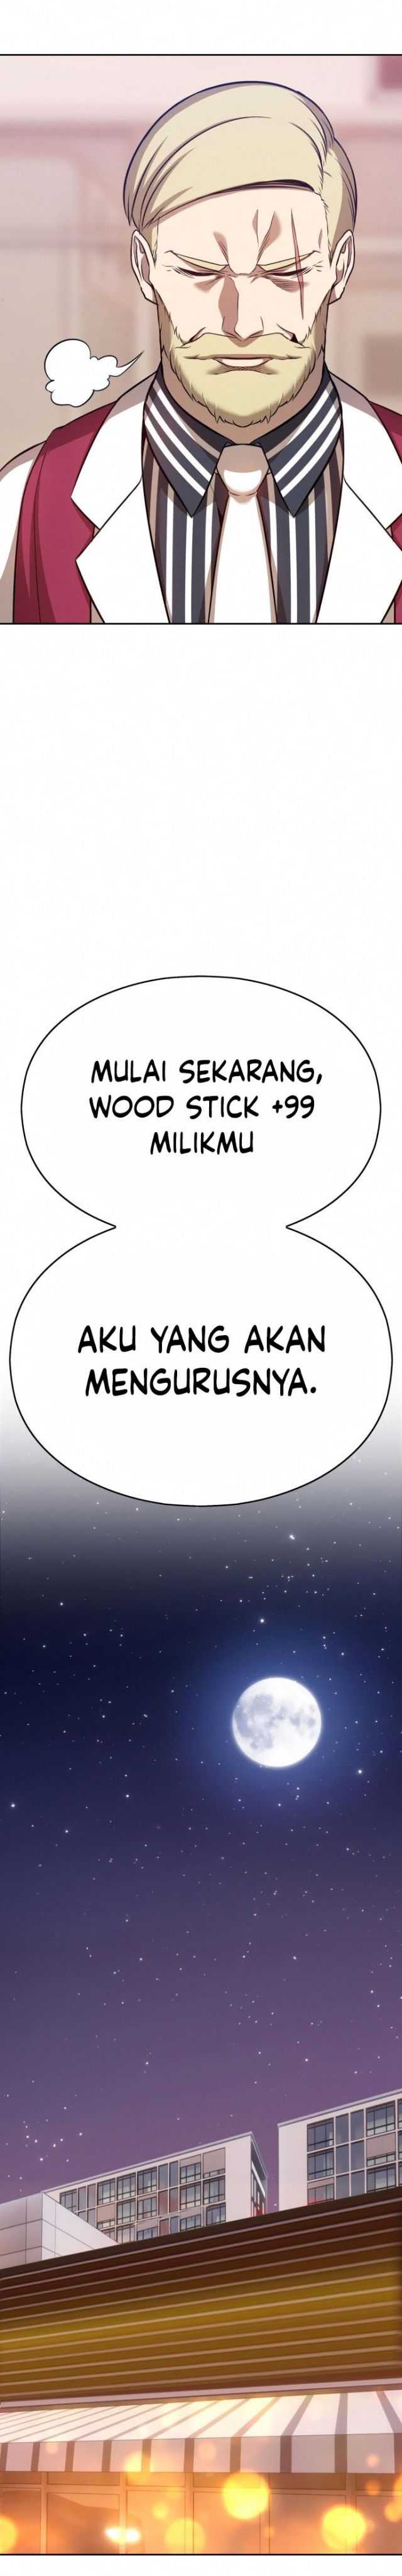 +99 Wooden Stick Chapter 5